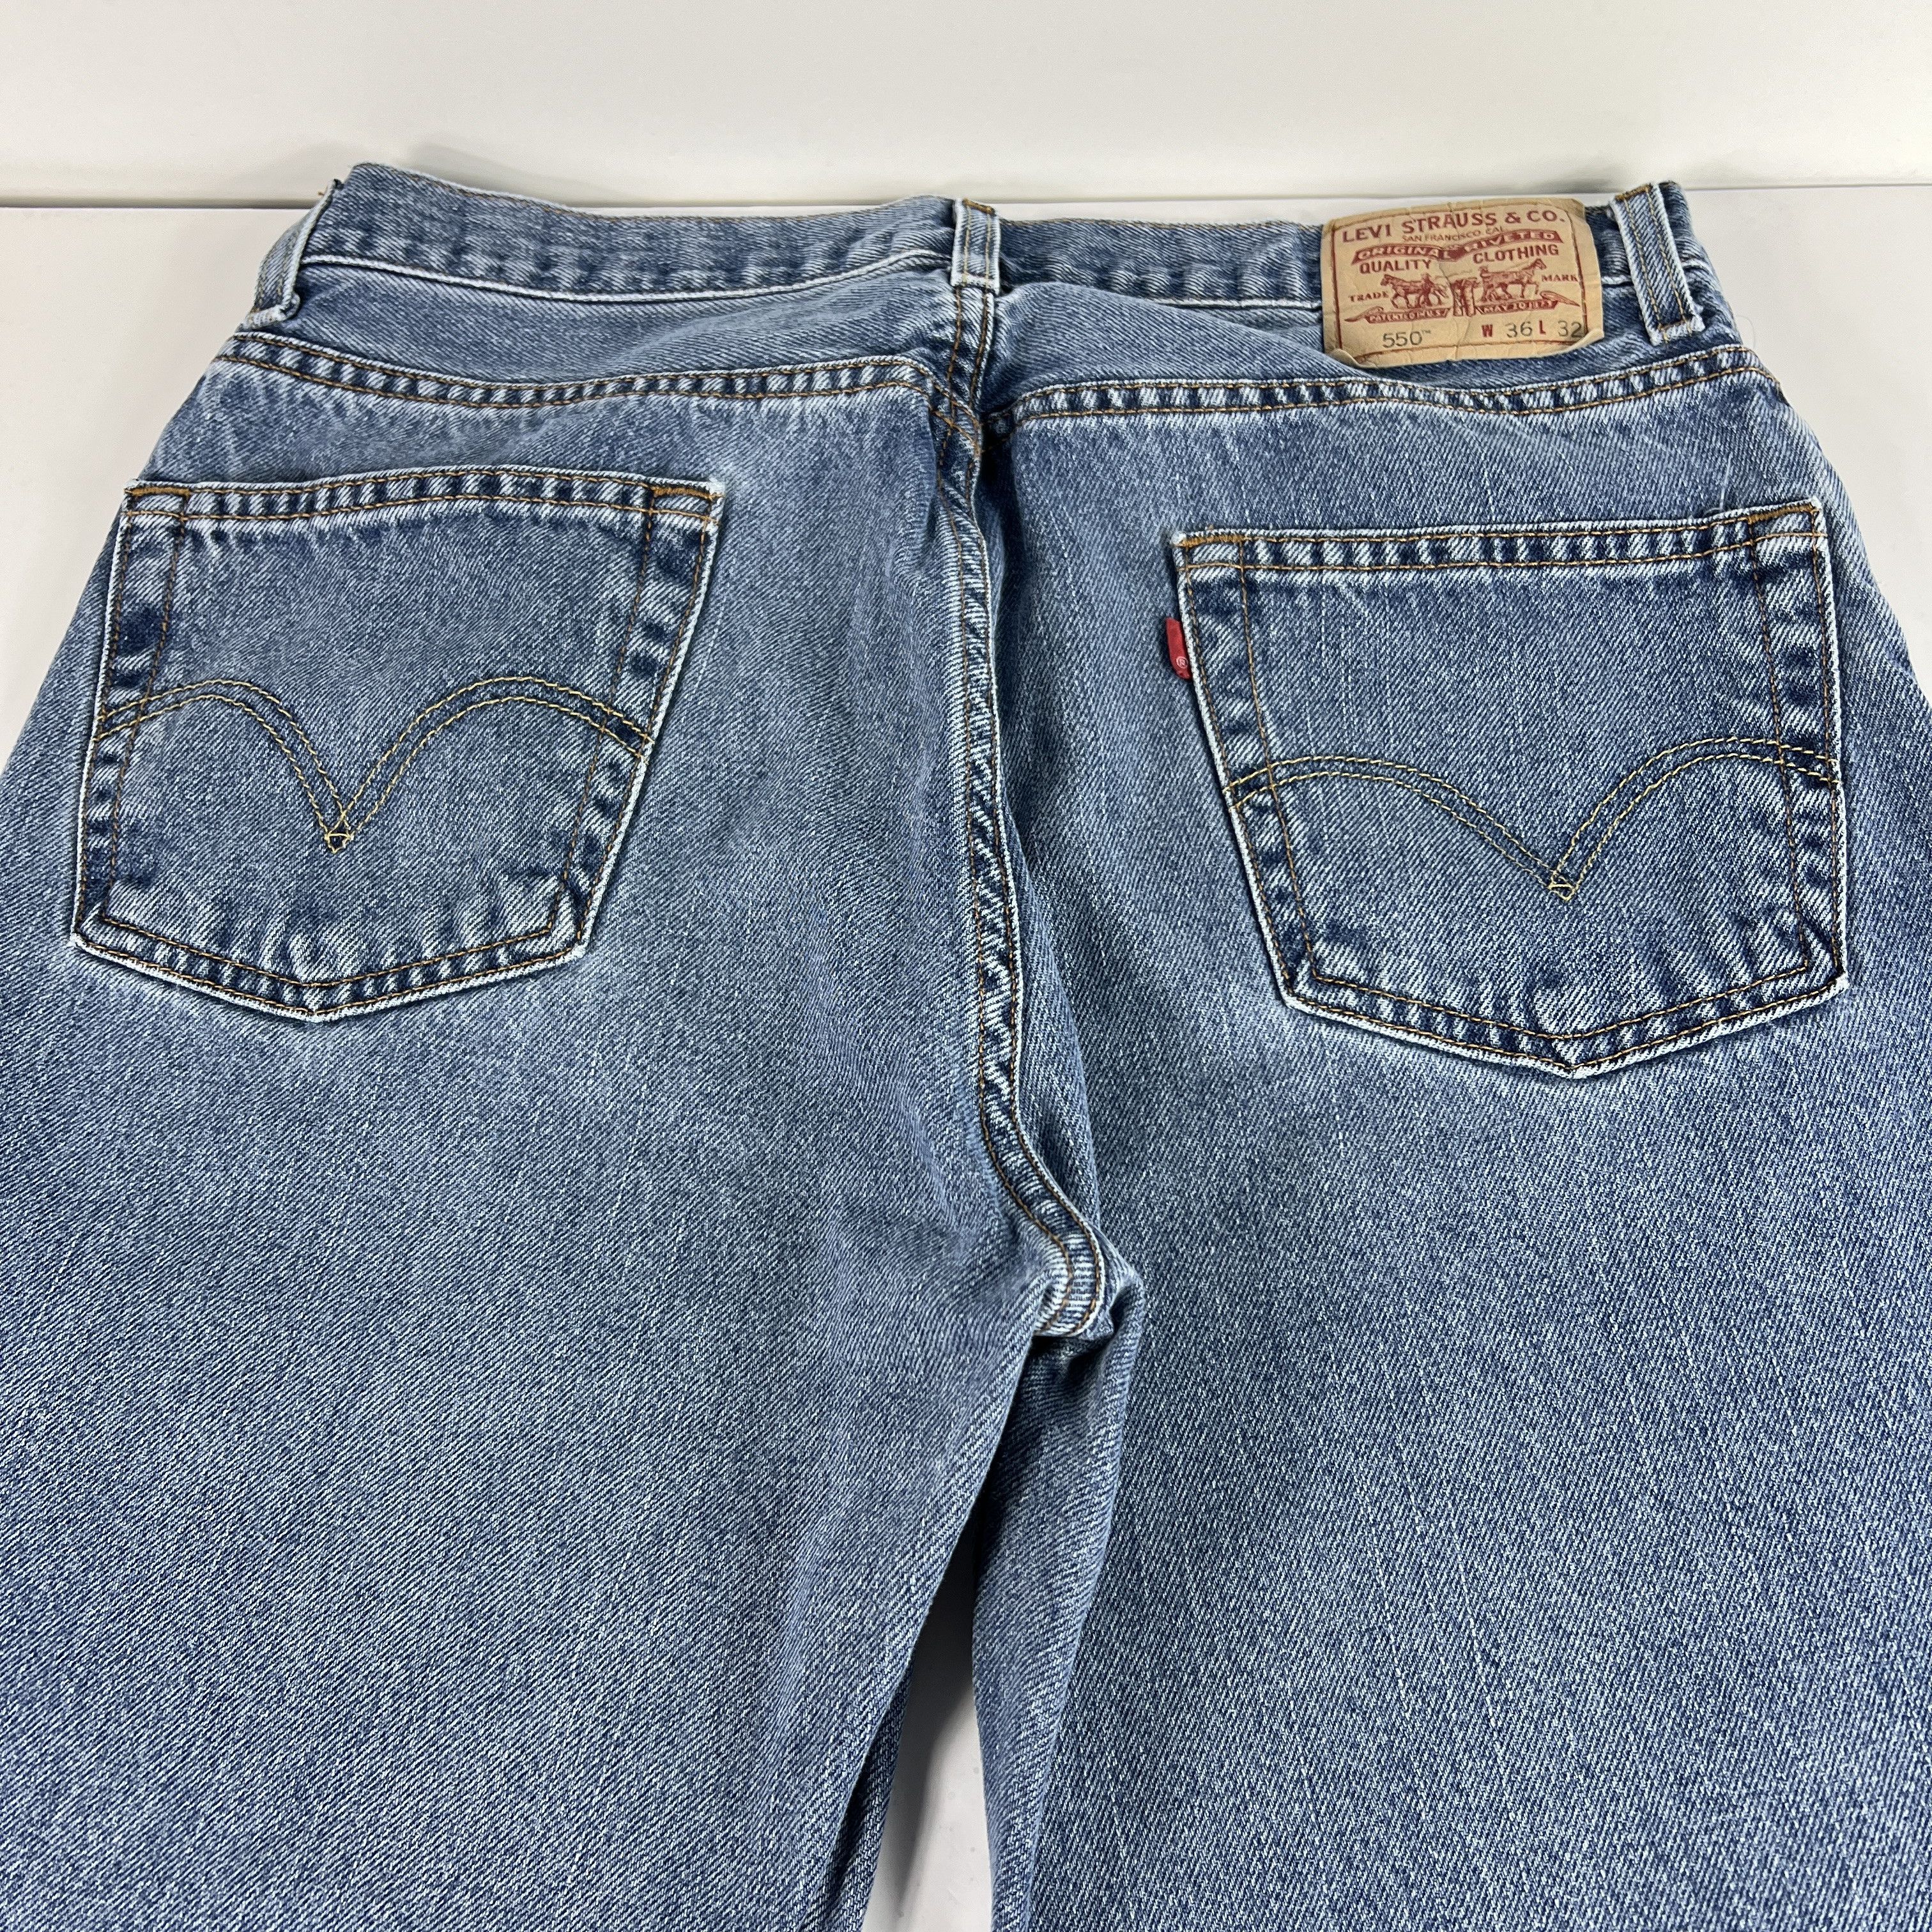 Levi's Y2K Levi's Jean 550 Relaxed Straight Blue Faded Cotton Denim Size US 34 / EU 50 - 11 Thumbnail